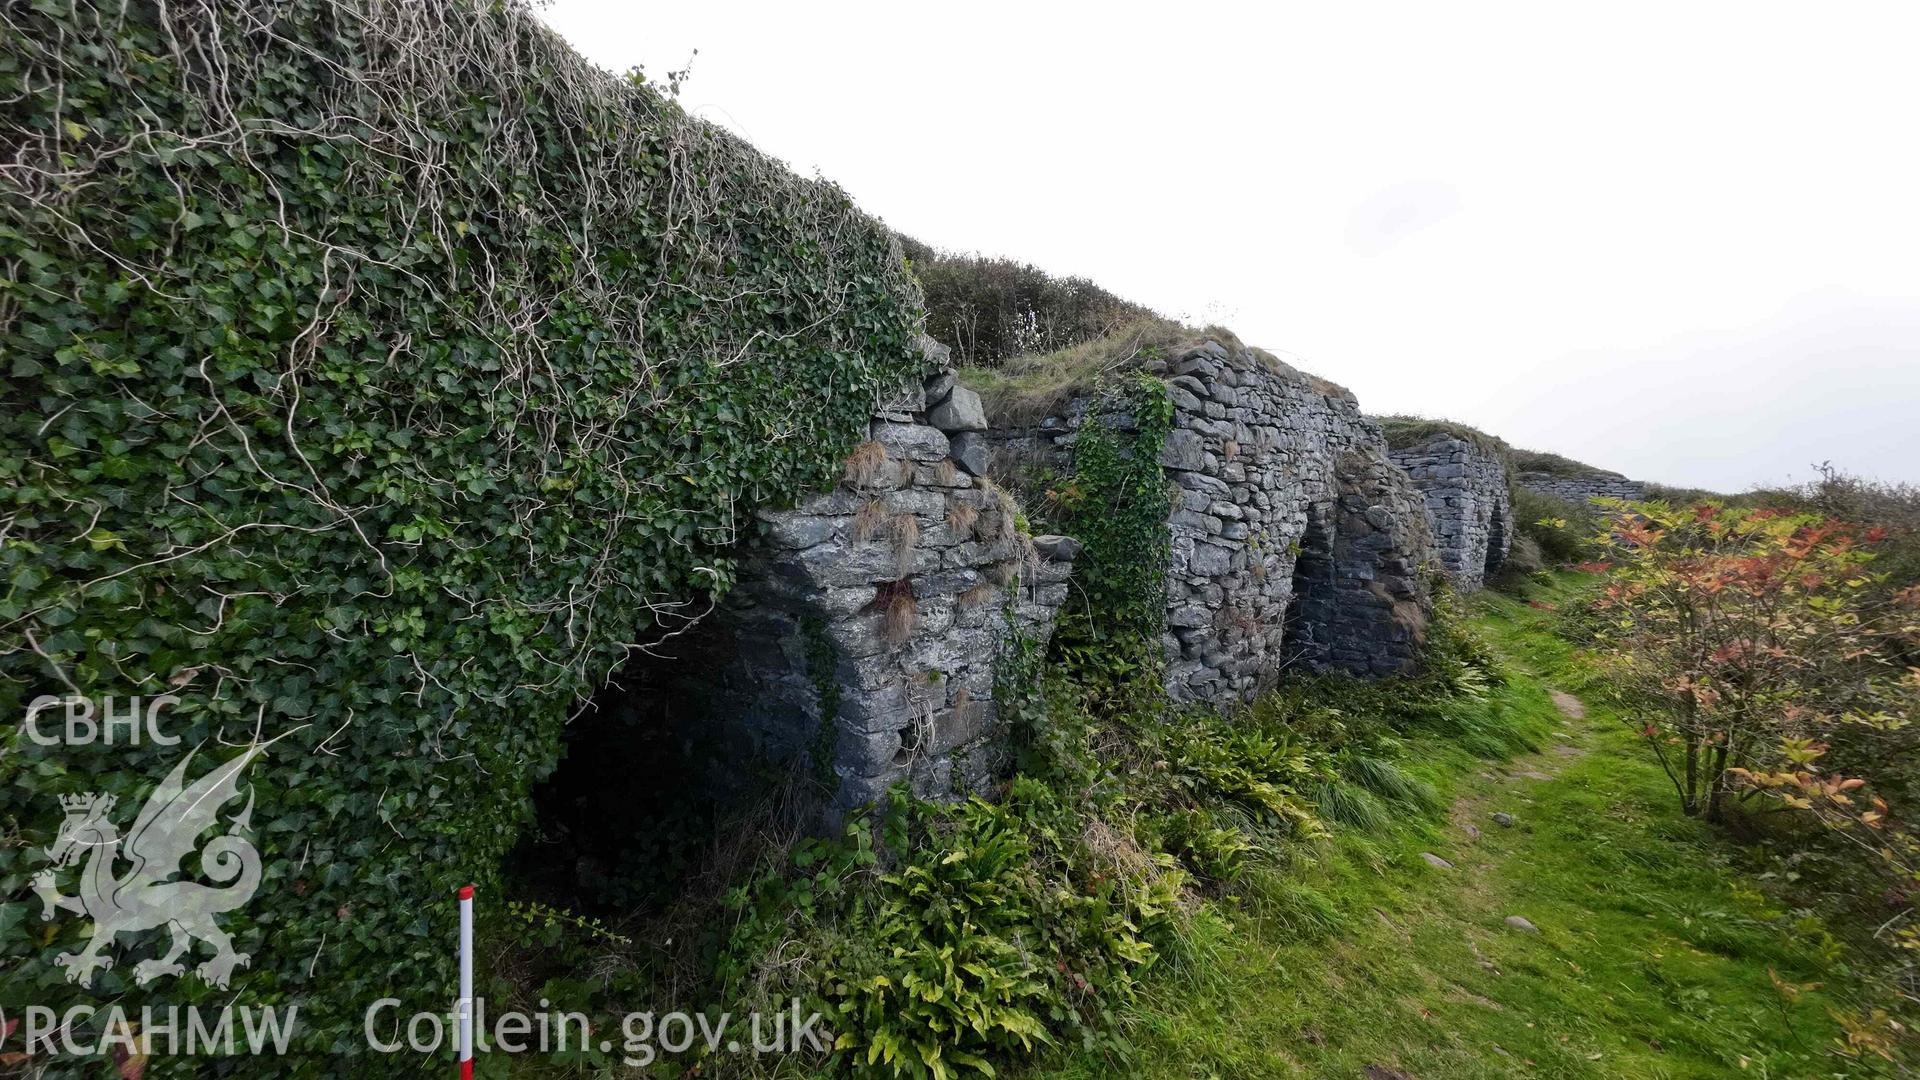 Digital colour photograph showing Craiglas Lime Kilns - general view along the north-west (seaward) side of the lime kiln complex, looking south-west. Lime kiln No.4 is in the foreground.